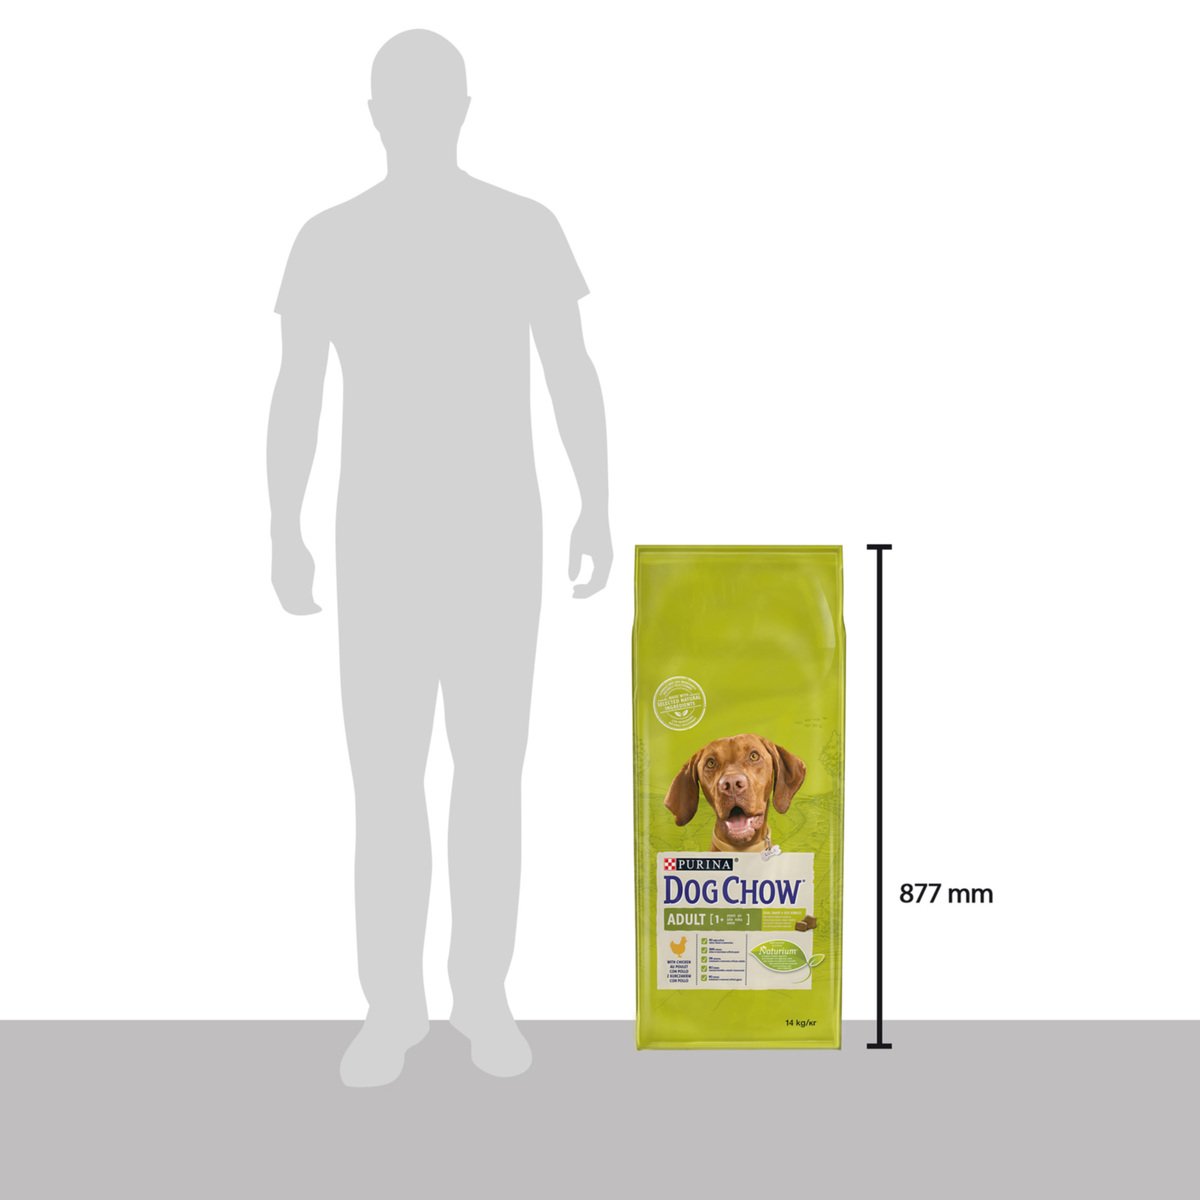 Purina Dog Chow Adult +1 year with Chicken Dry Dog Food 14 kg